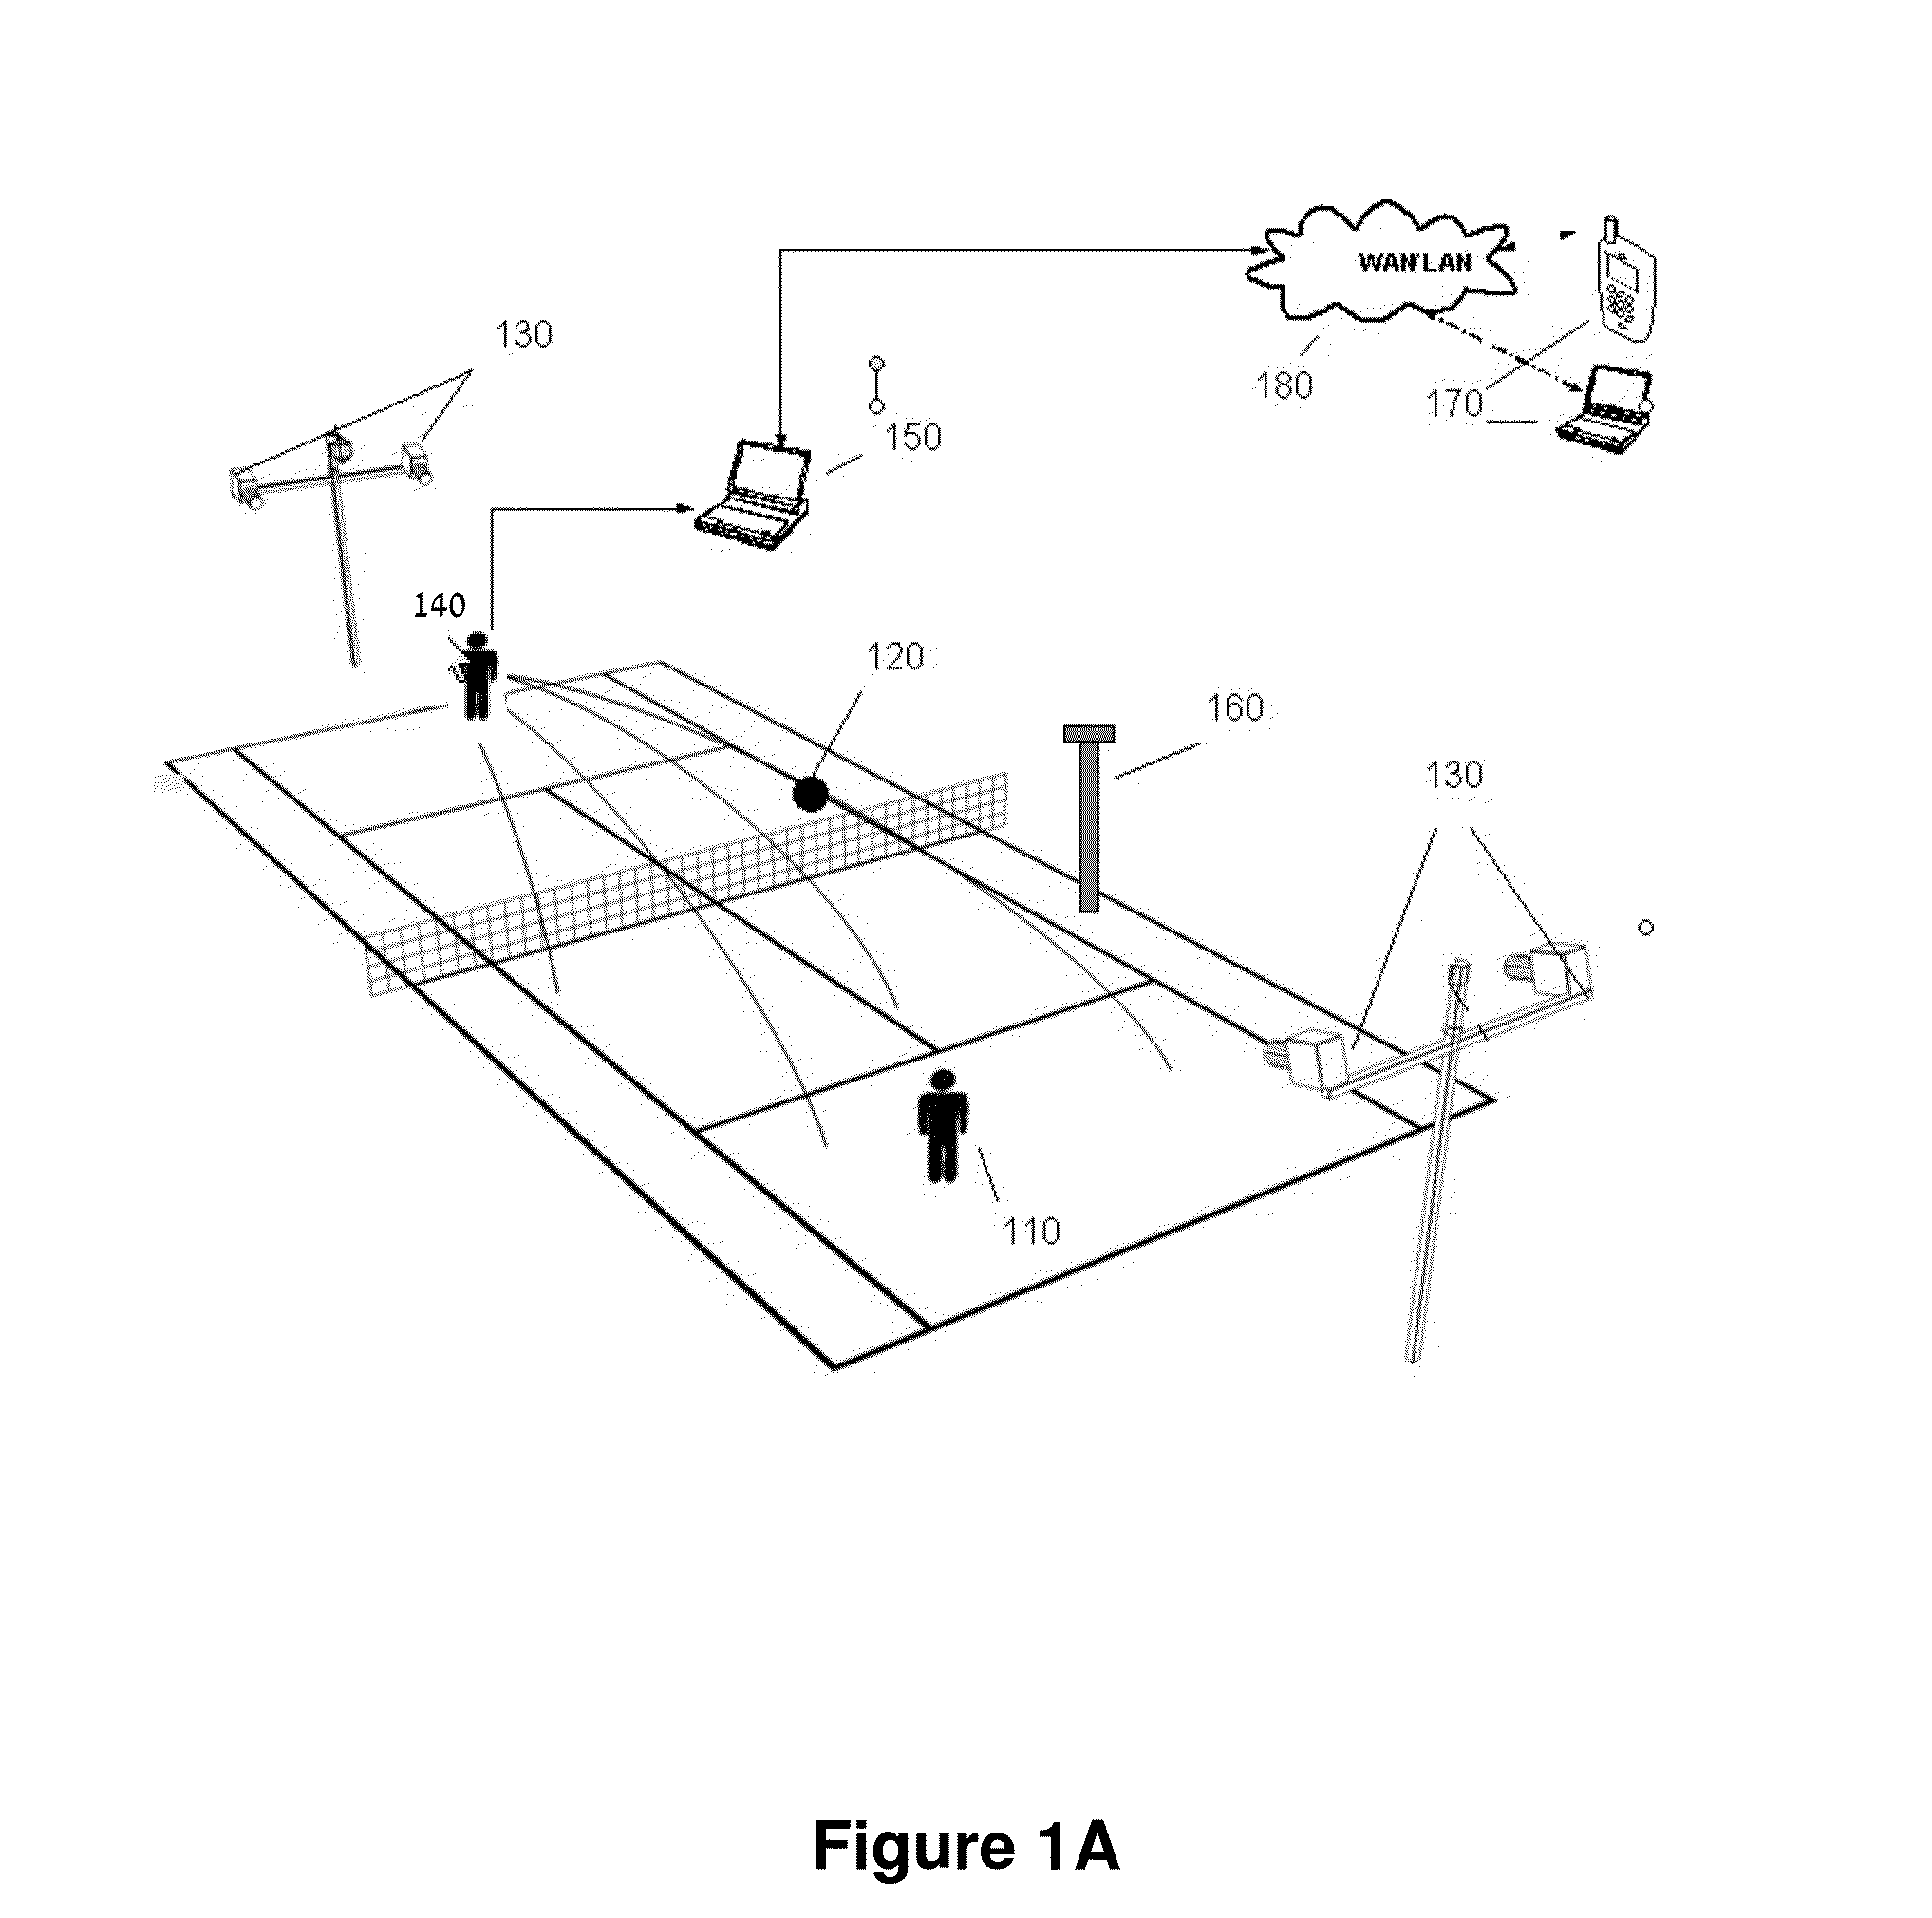 Smart-court system and method for providing real-time debriefing and training services of sport games